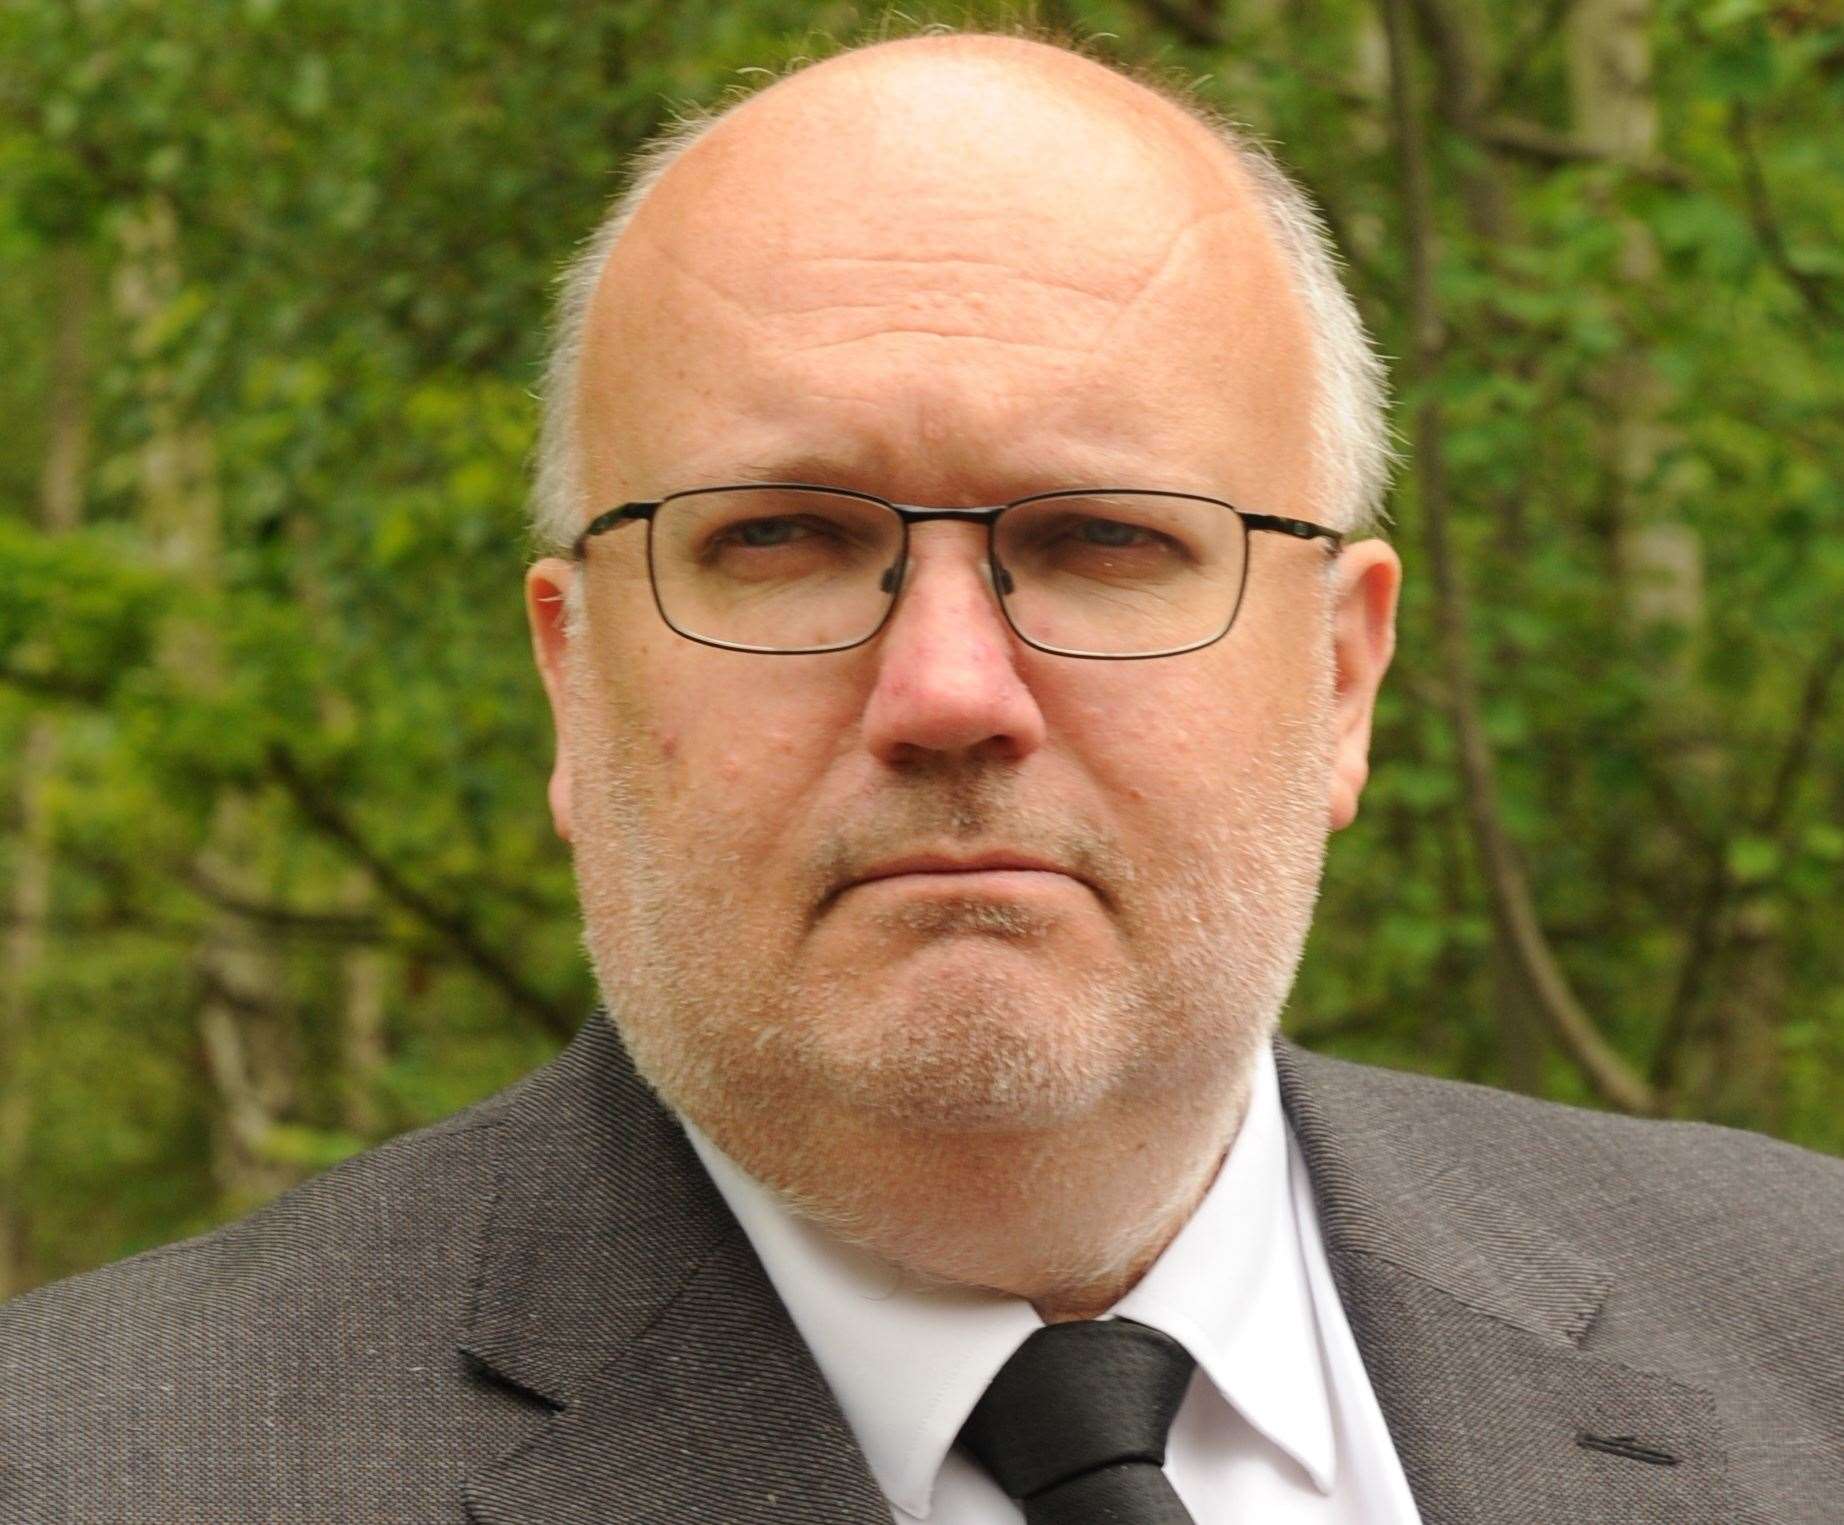 Dartford council leader Jeremy Kite says people have been let down